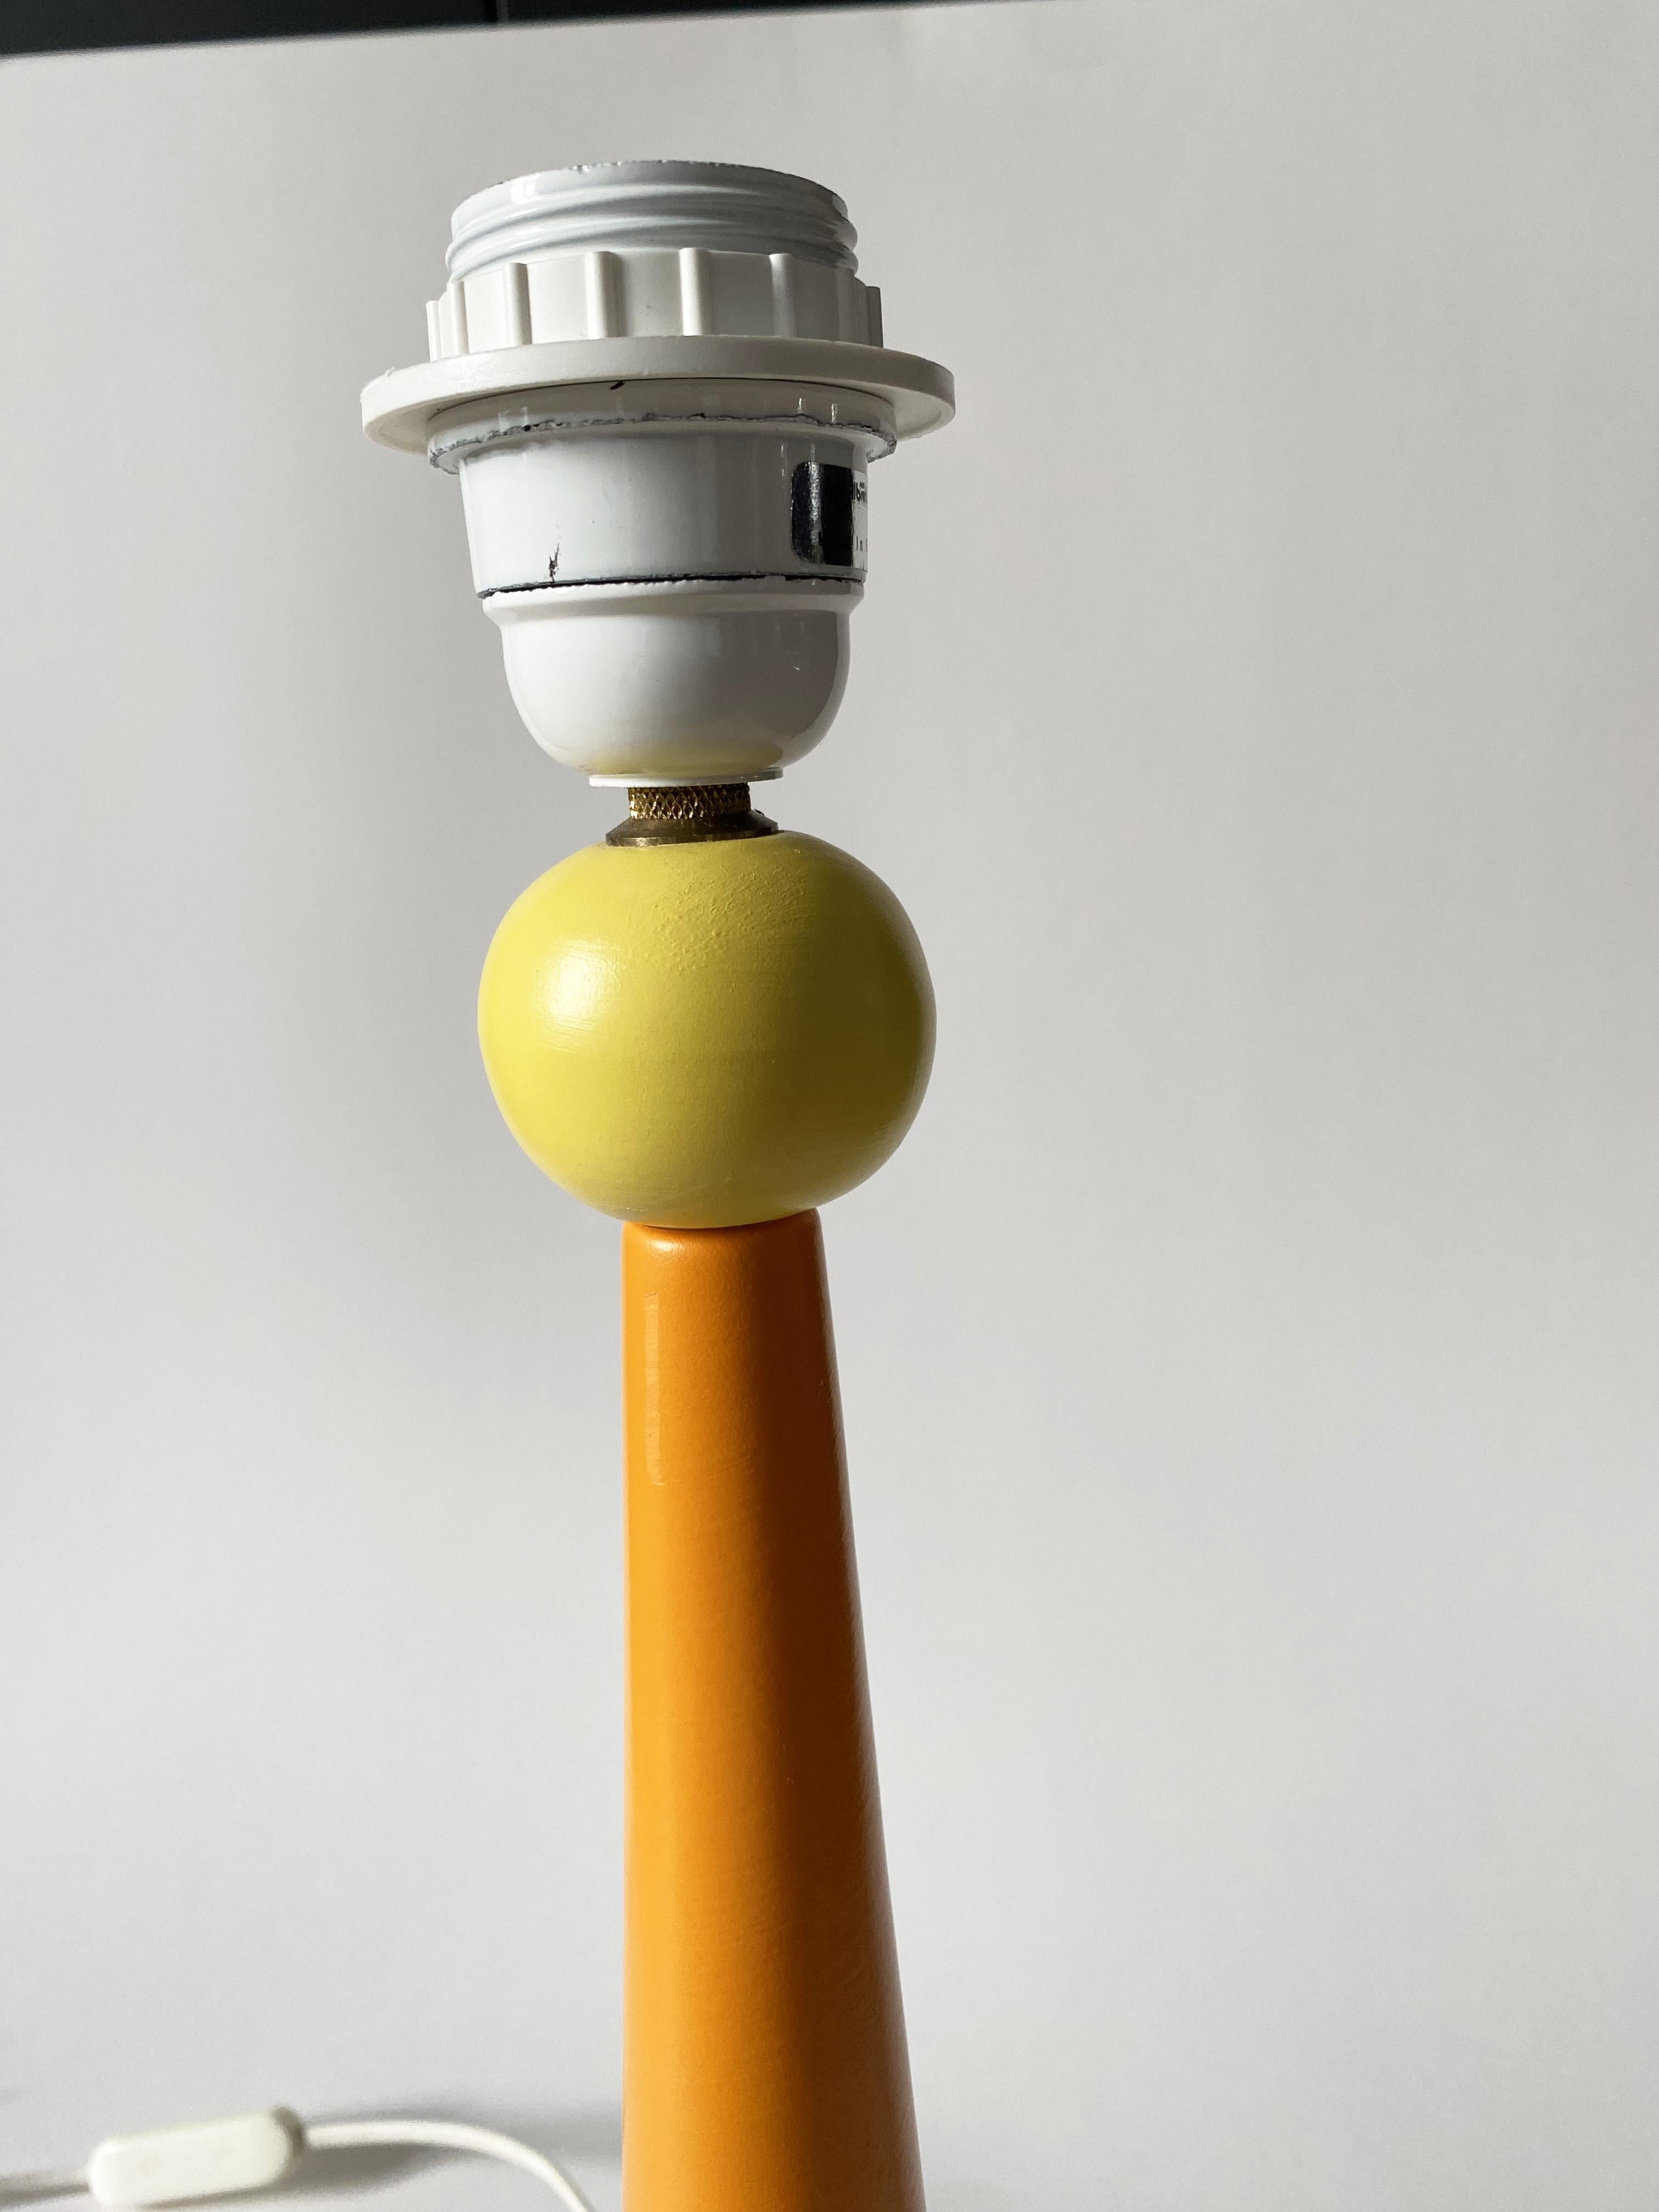 Postmodern Lamp in Ceramic, style of Memphis Milano or Olivier Villatte, 1980s.
Good condition.